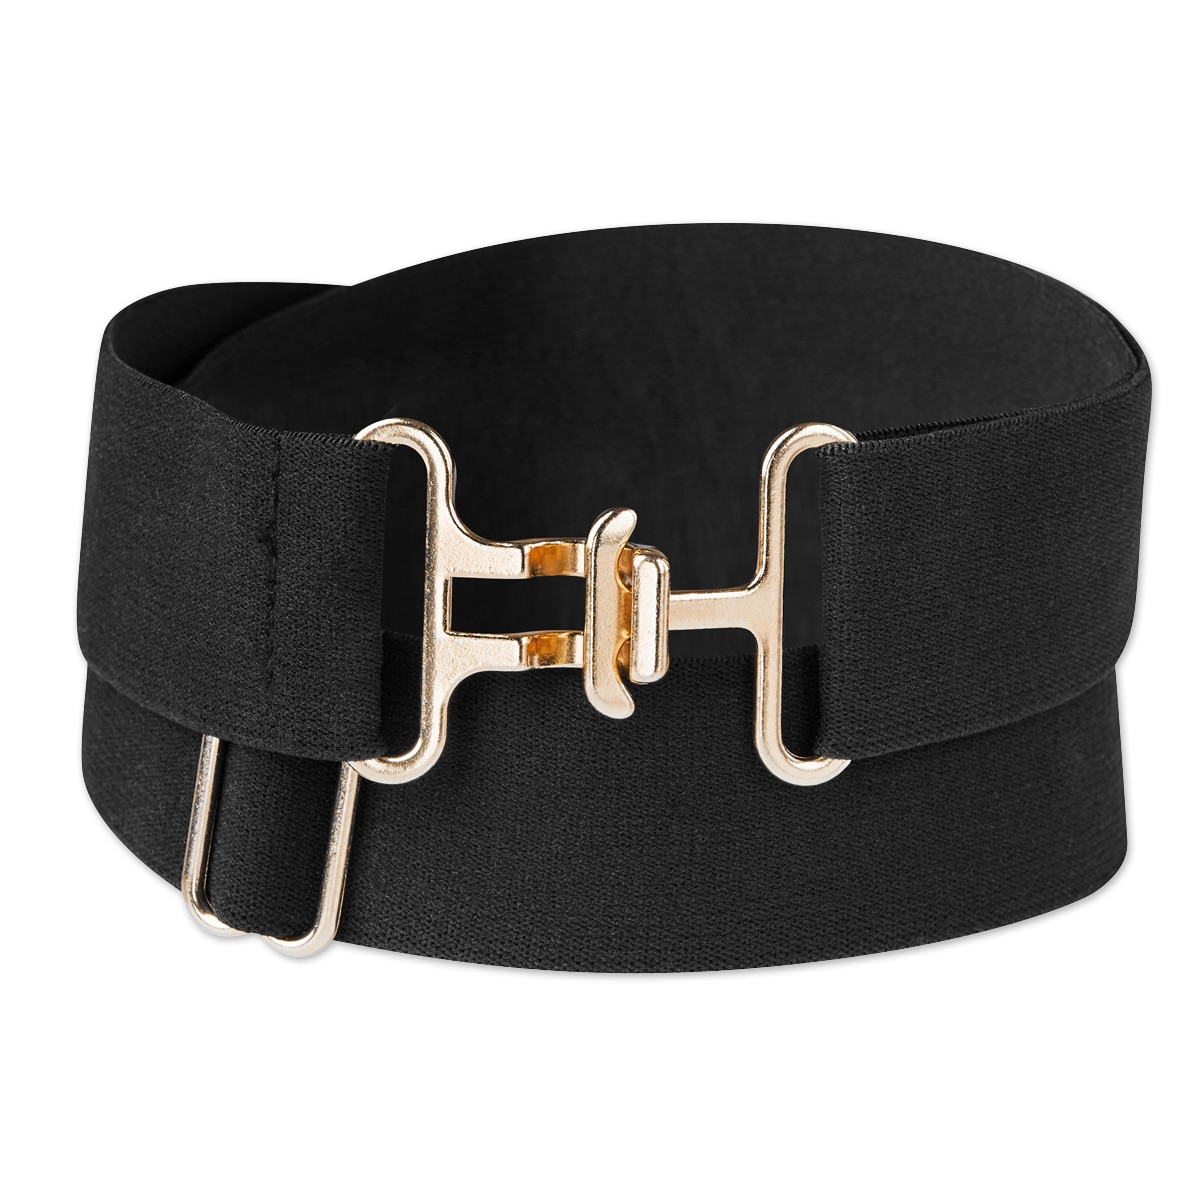 Belle & Bow Equestrian Girl's Show Belts